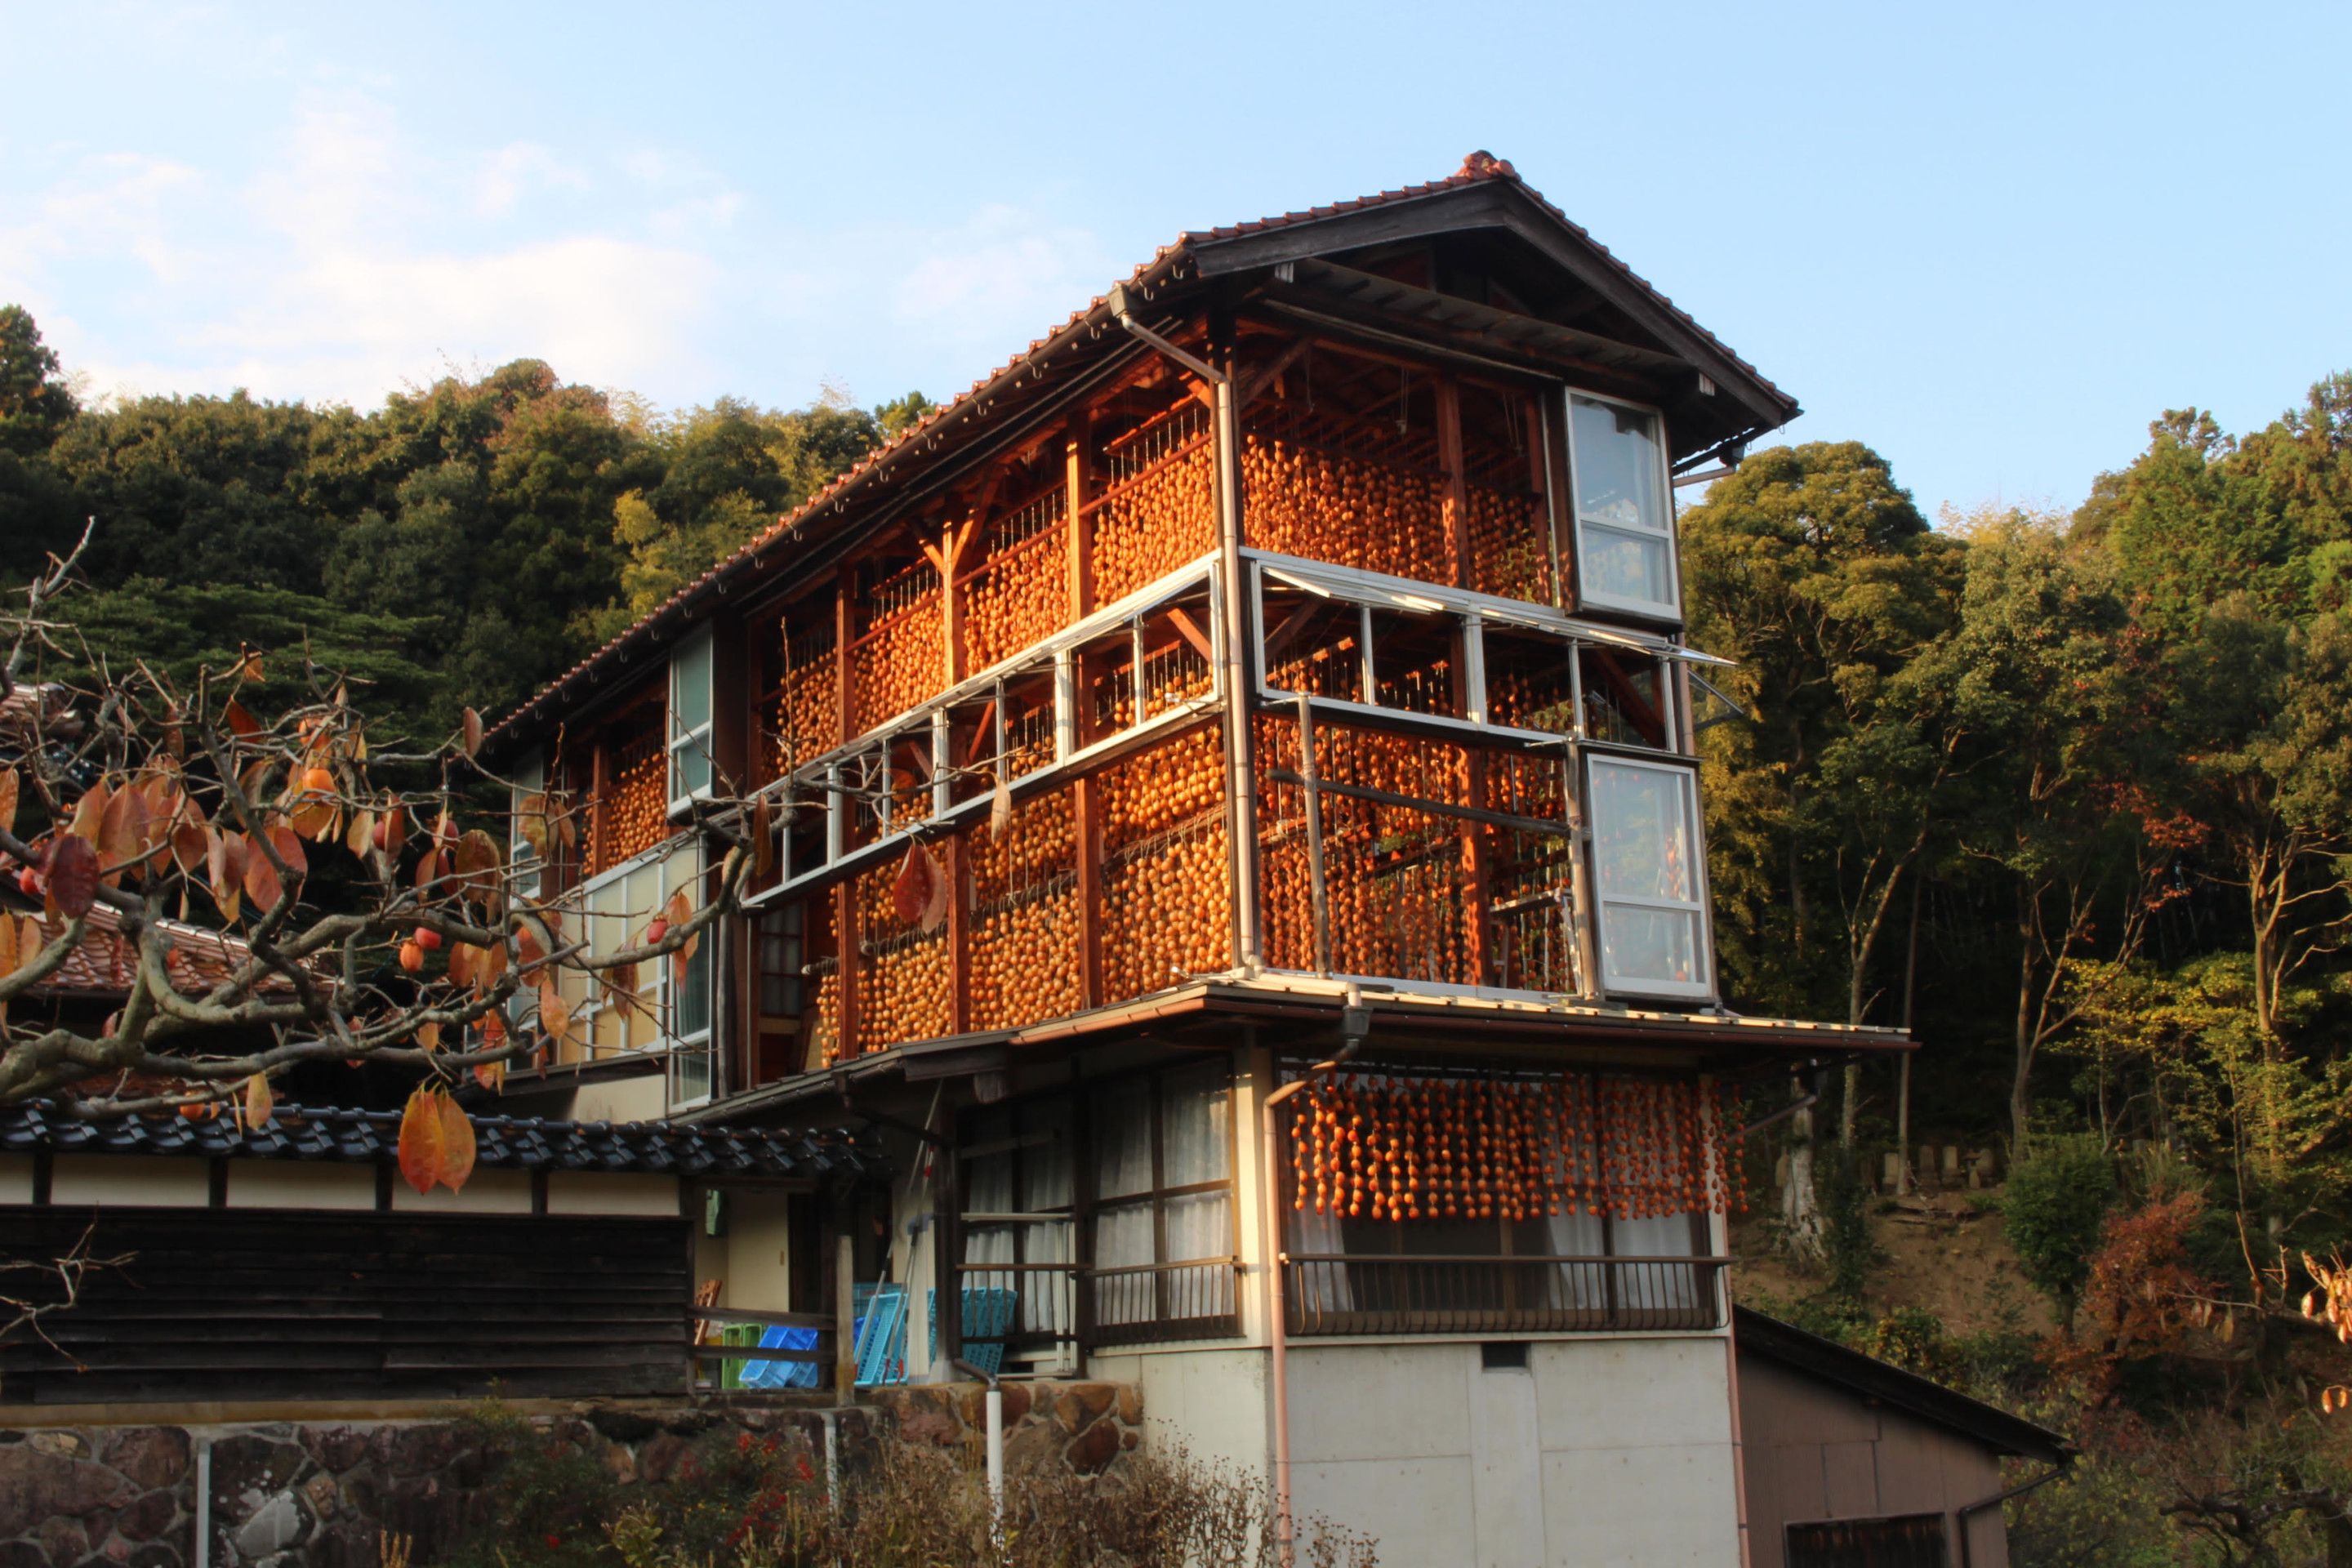 a house in japan with decorative embellishments over windows